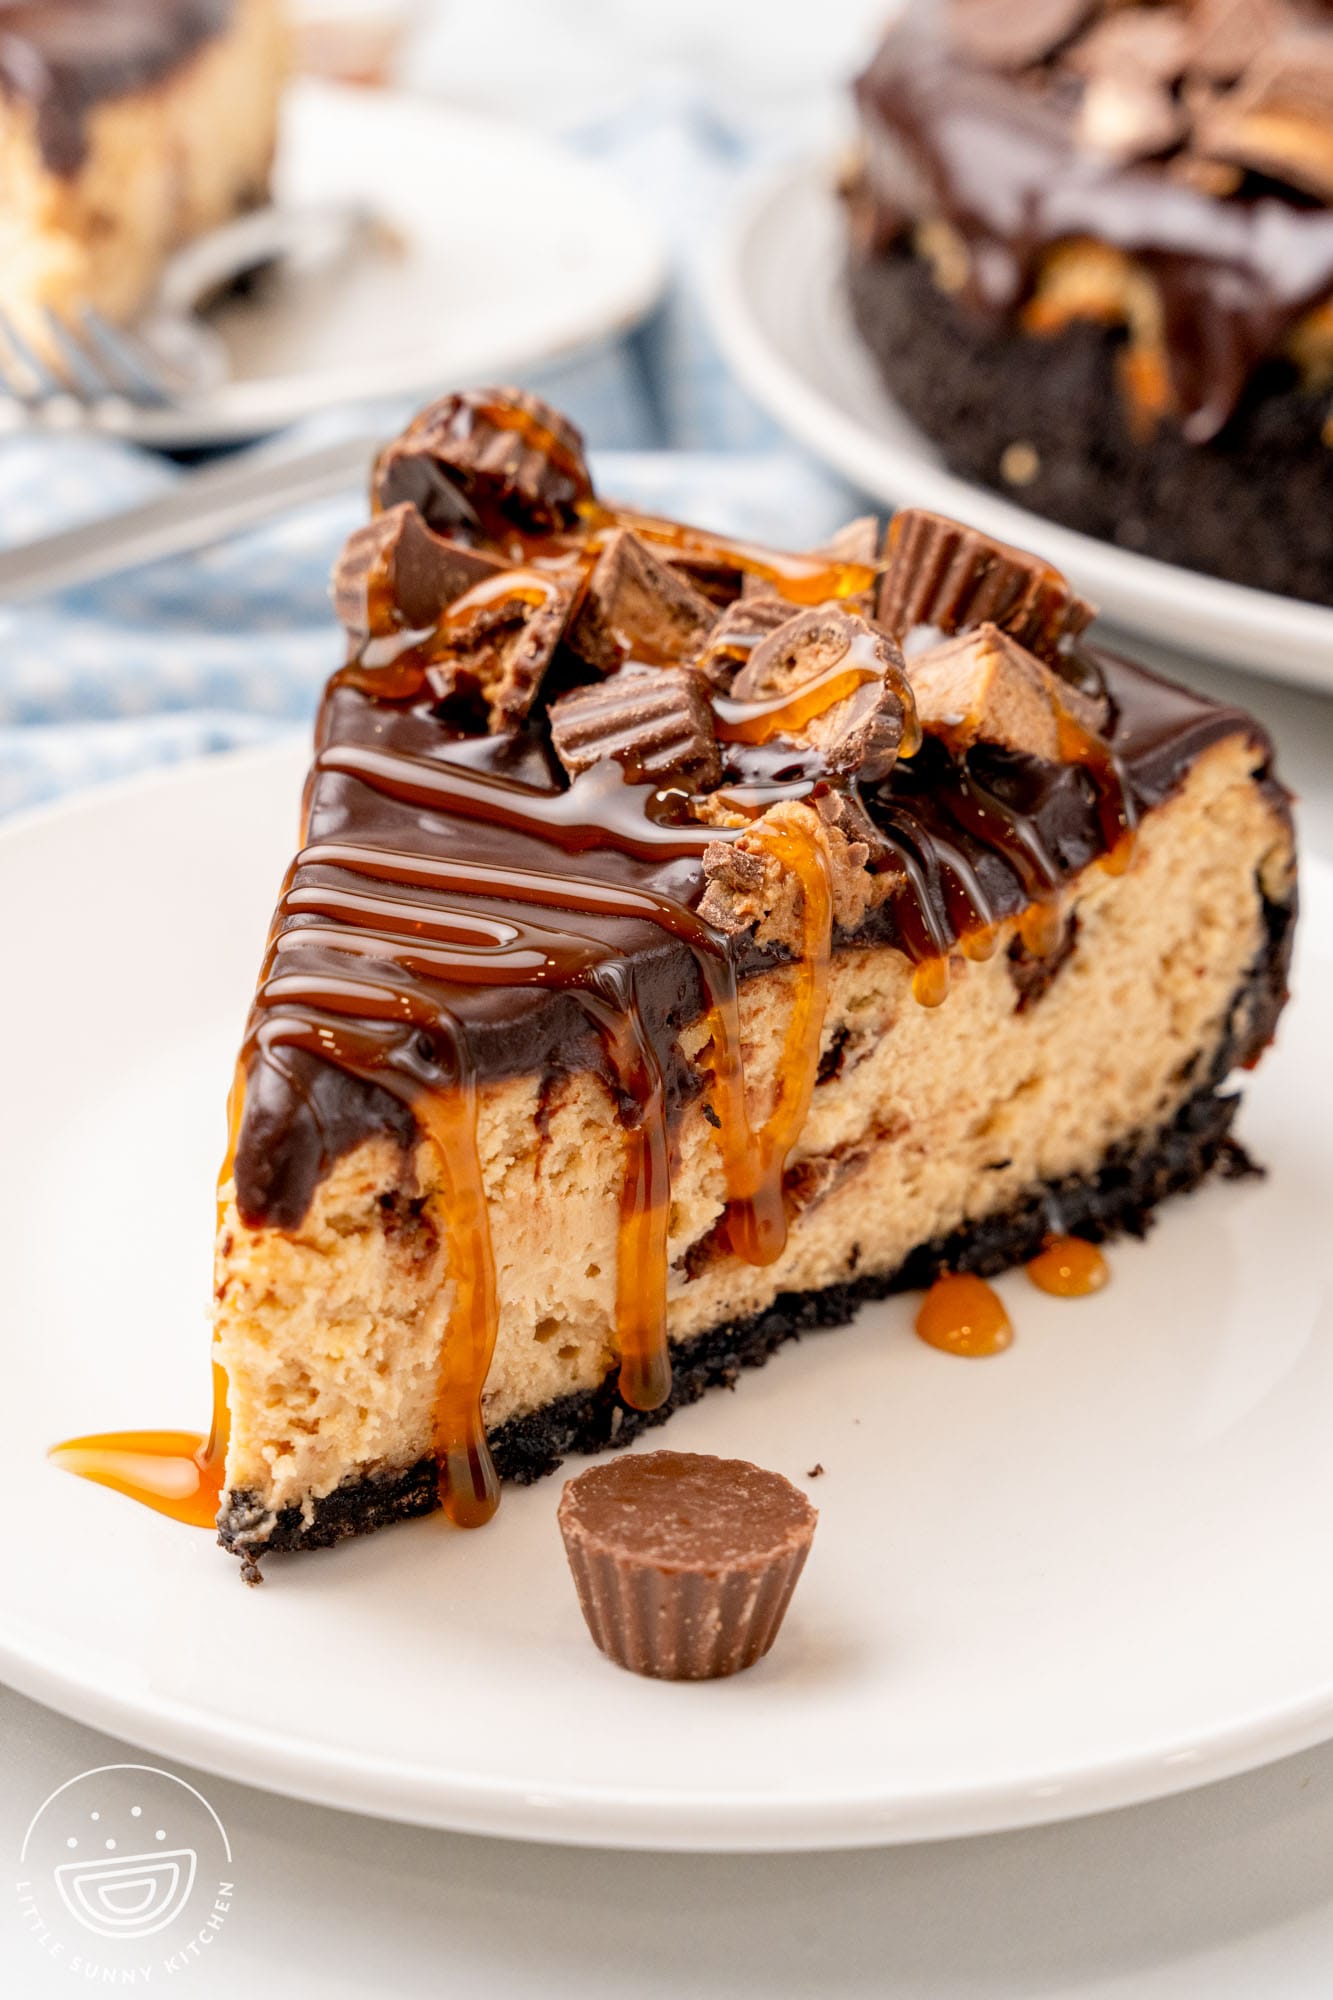 A small white plate holding a slice of homemade Reese's caramel cheesecake, drizzled with caramel sauce and topped with peanut butter cups.